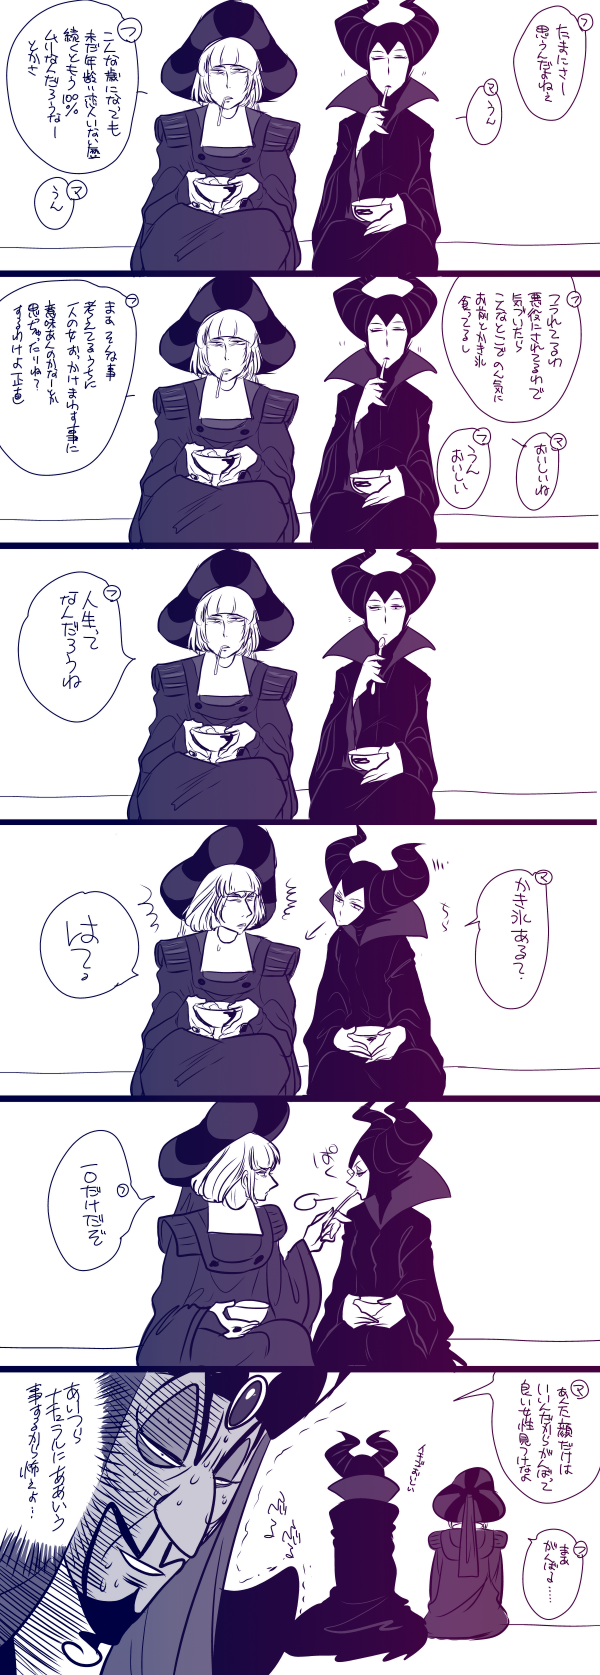 6koma aladdin_(disney) claude_frollo crossover disney feeding hat highres horns jafar maleficent marimo_(yousei_ranbu) one_man's_dream_ii shared_food side-by-side sitting sleeping_beauty the_hunchback_of_notre_dame translation_request